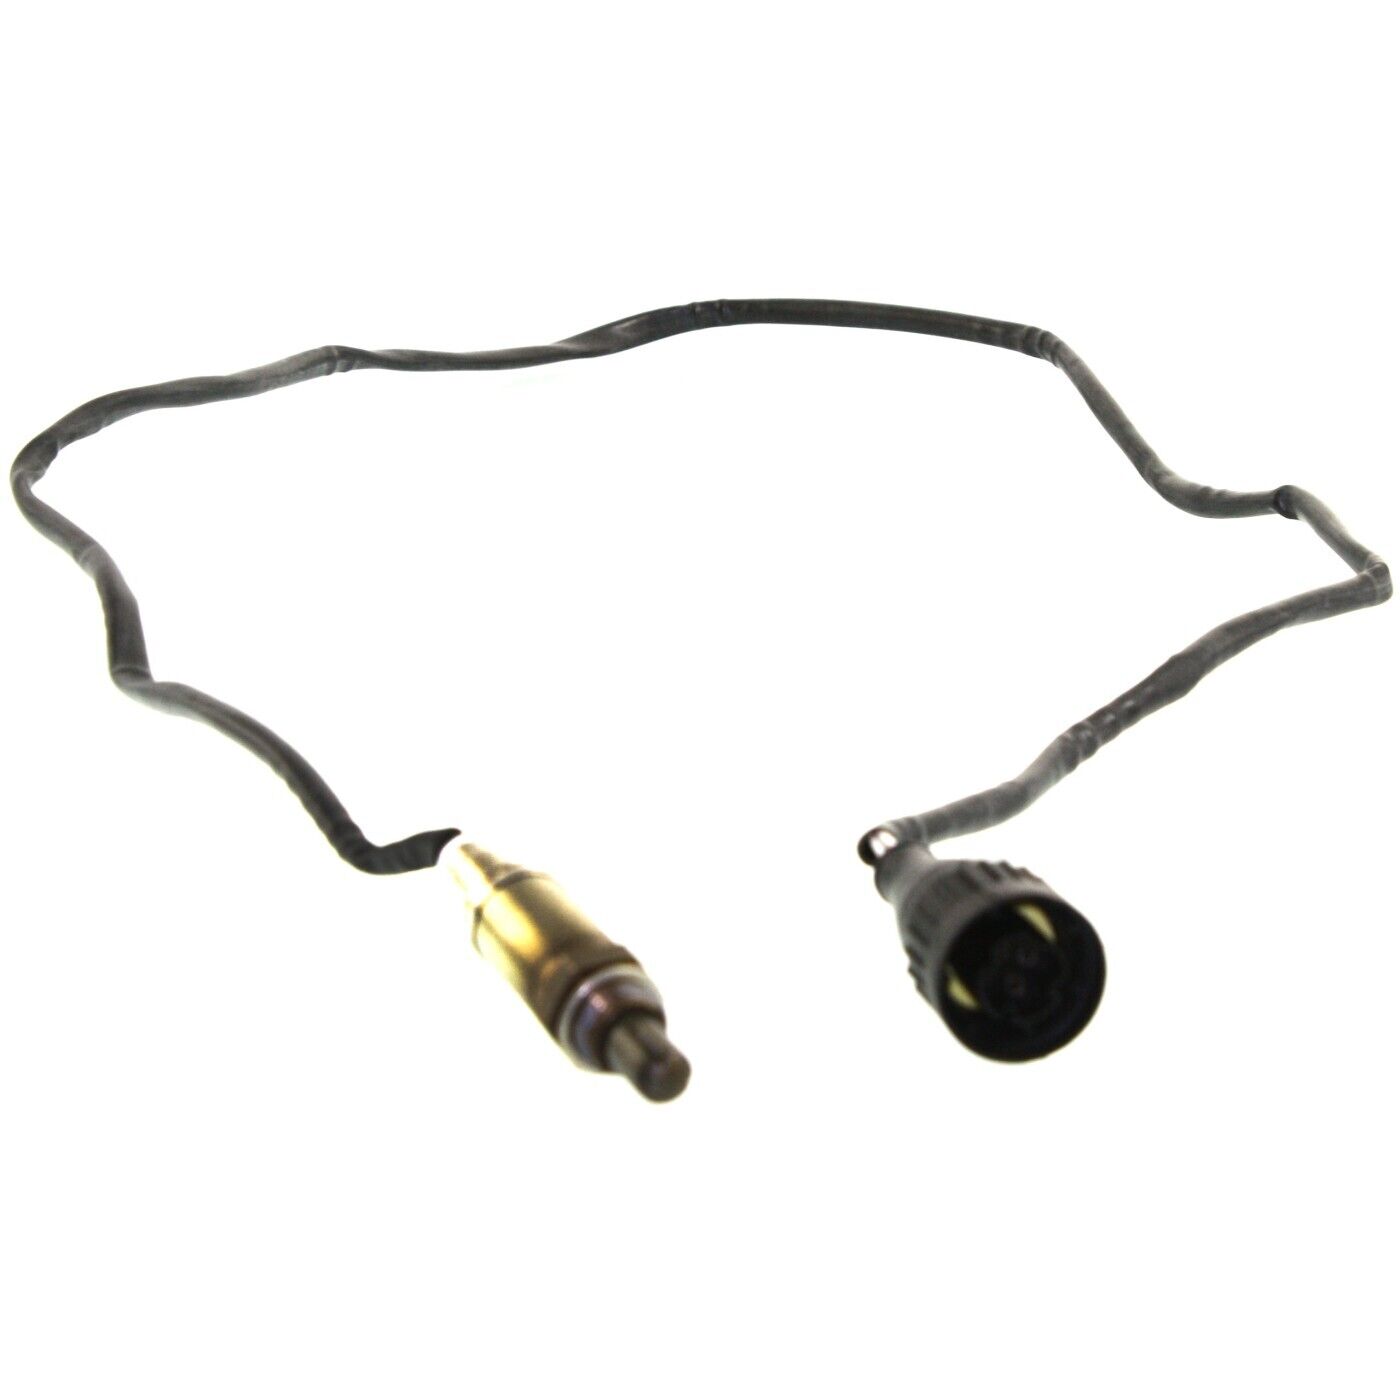 O2 Oxygen Sensor For 1987-1995 BMW 325i 325is Upstream 55.7 in. Length 4-Wire